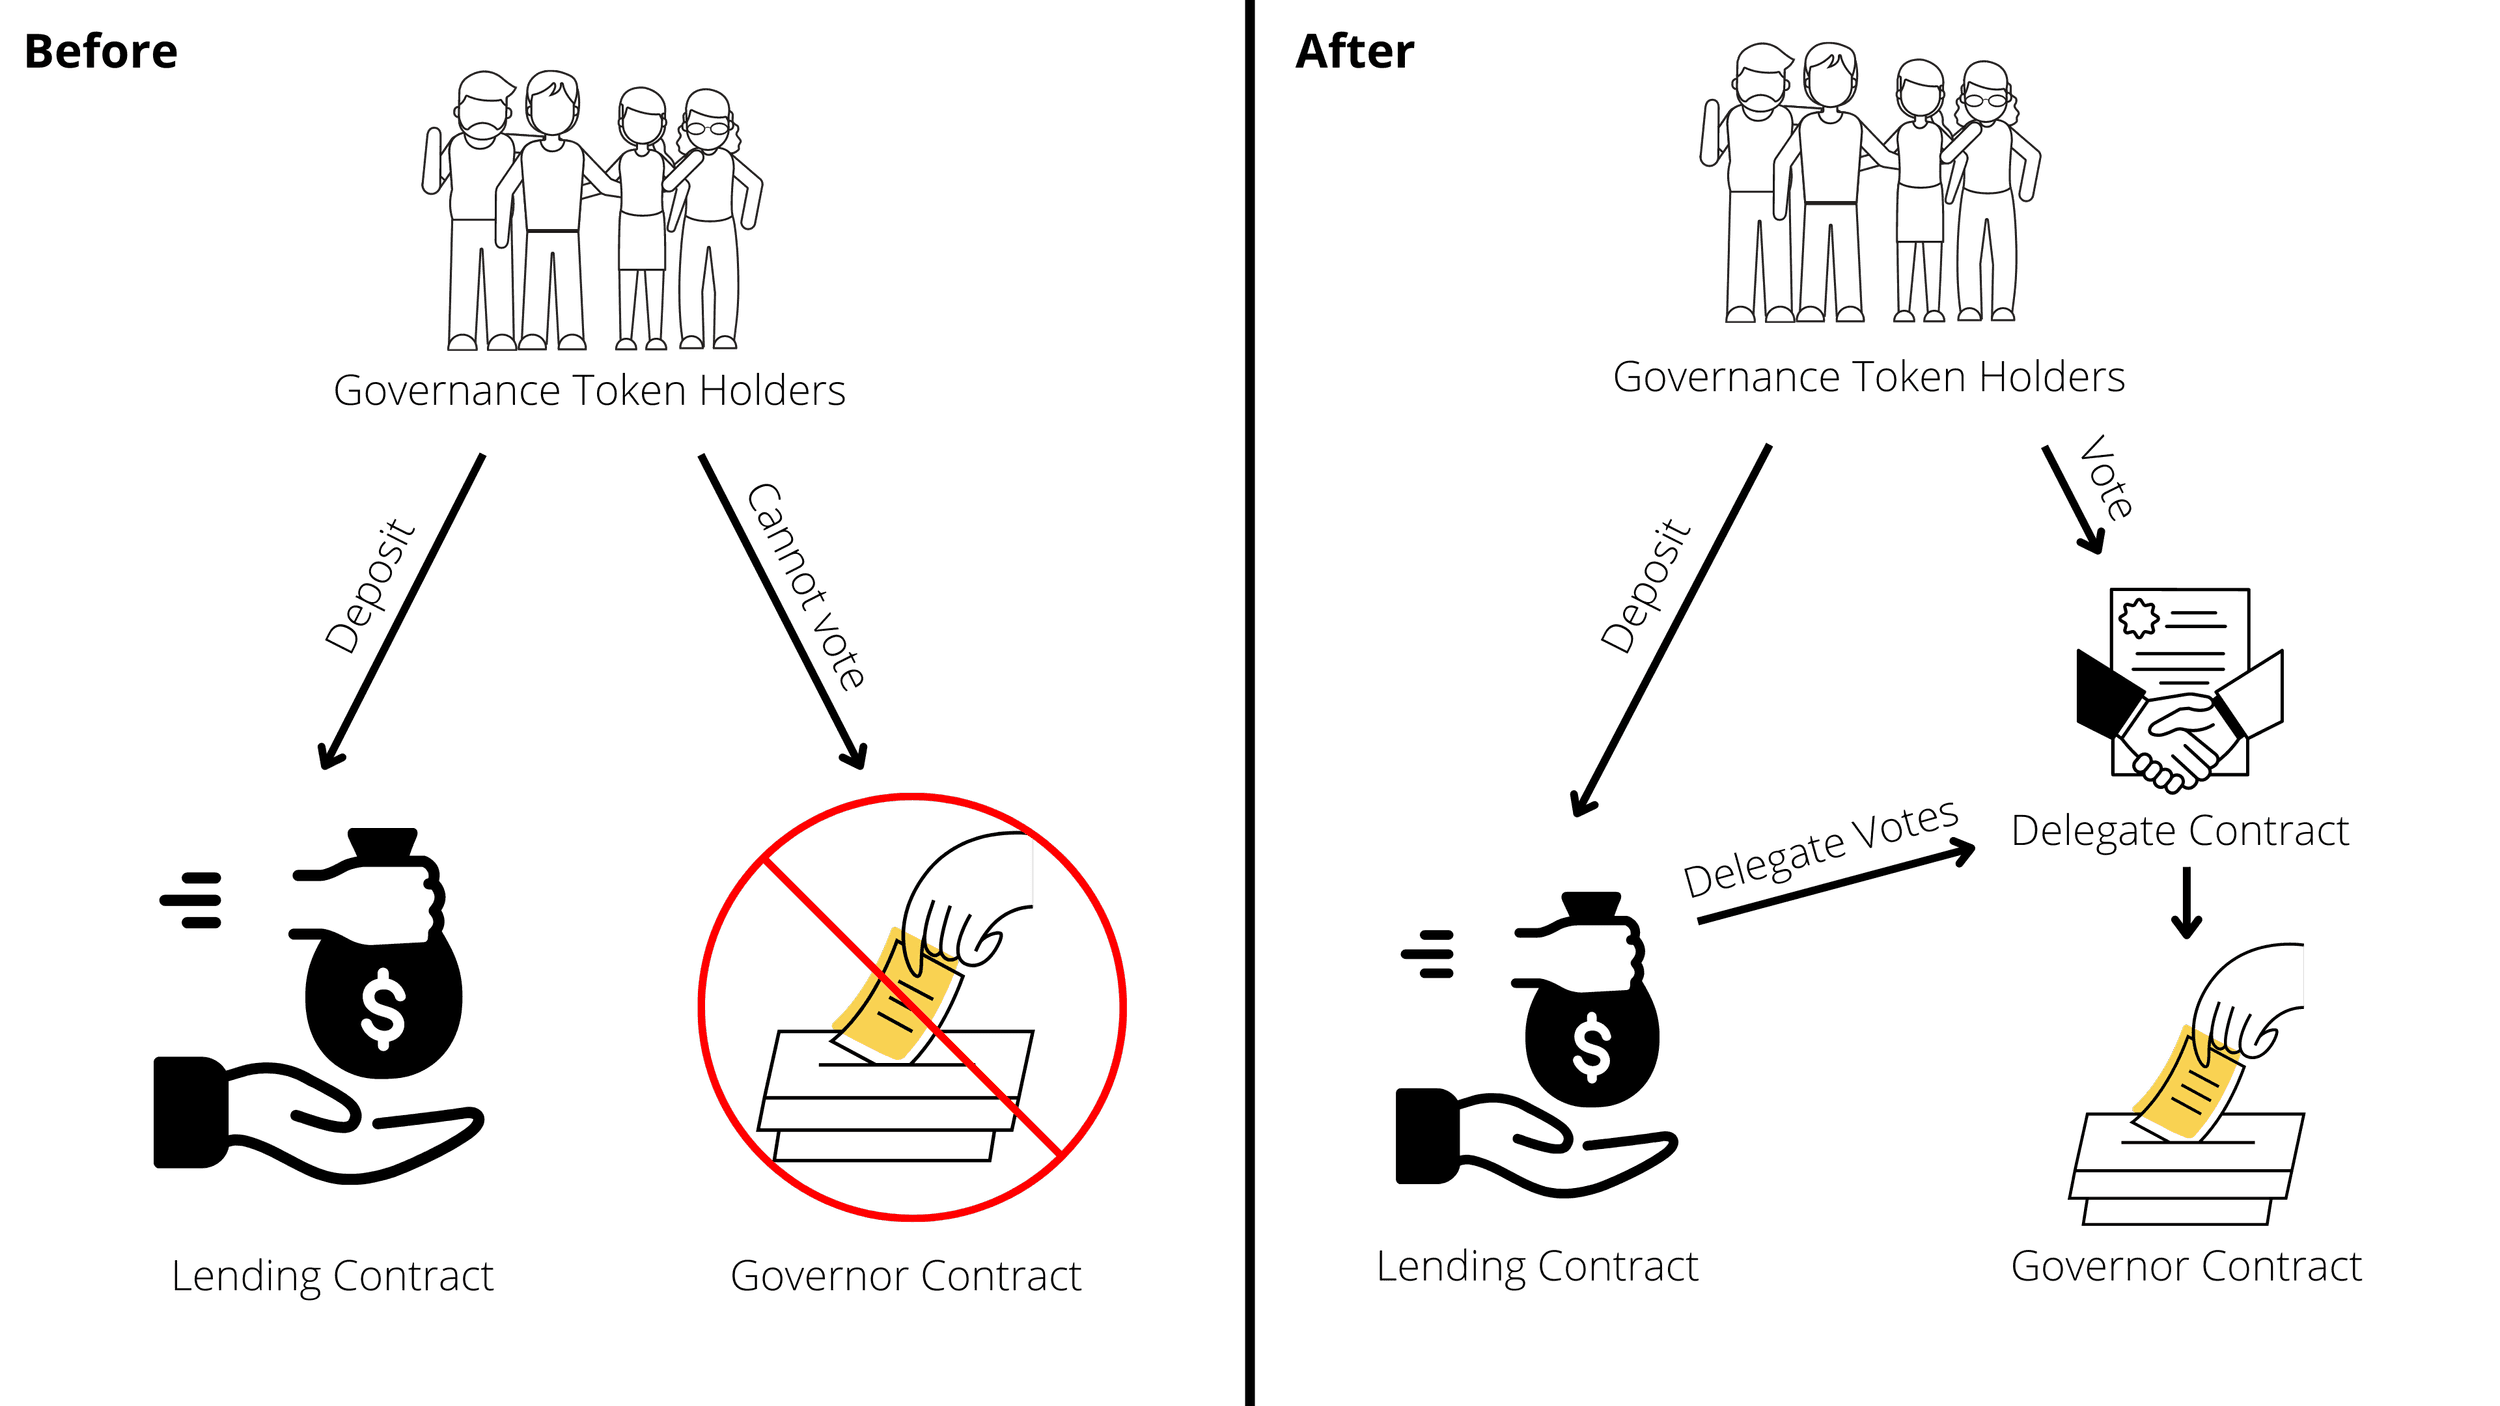 Flexible voting before and after